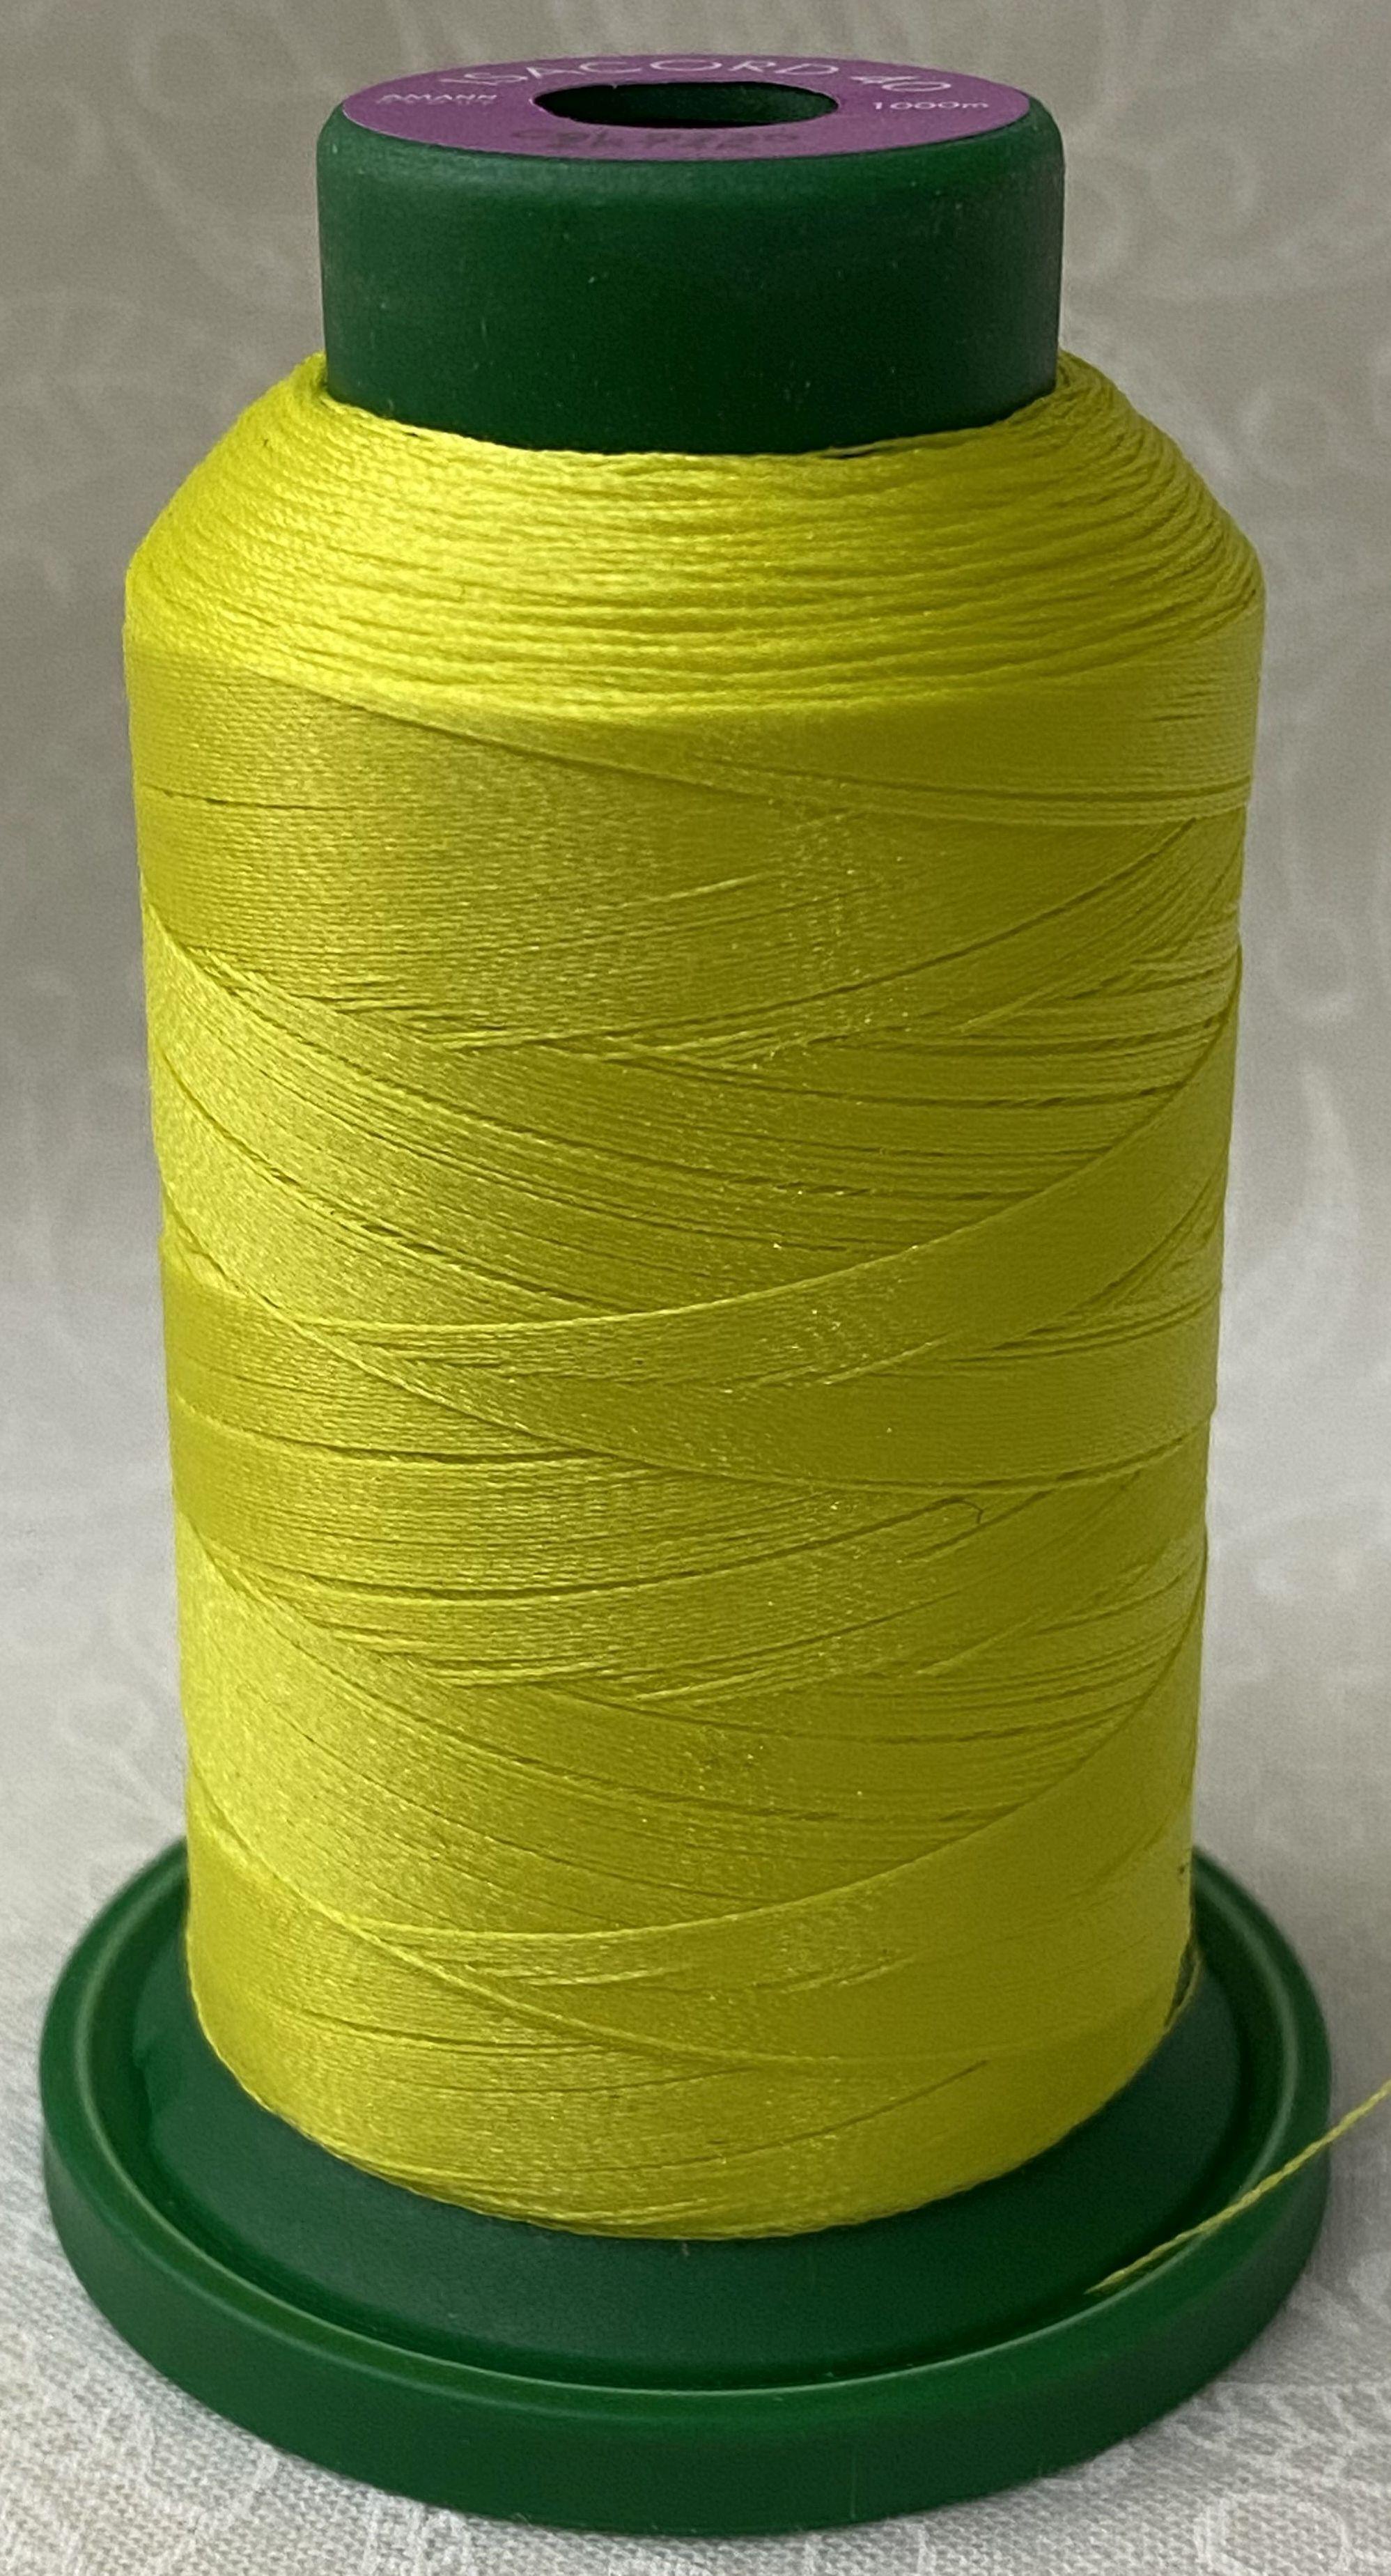 ISACORD 40 #0220 SUNBEAM YELLOW 1000m Machine Embroidery Sewing Thread